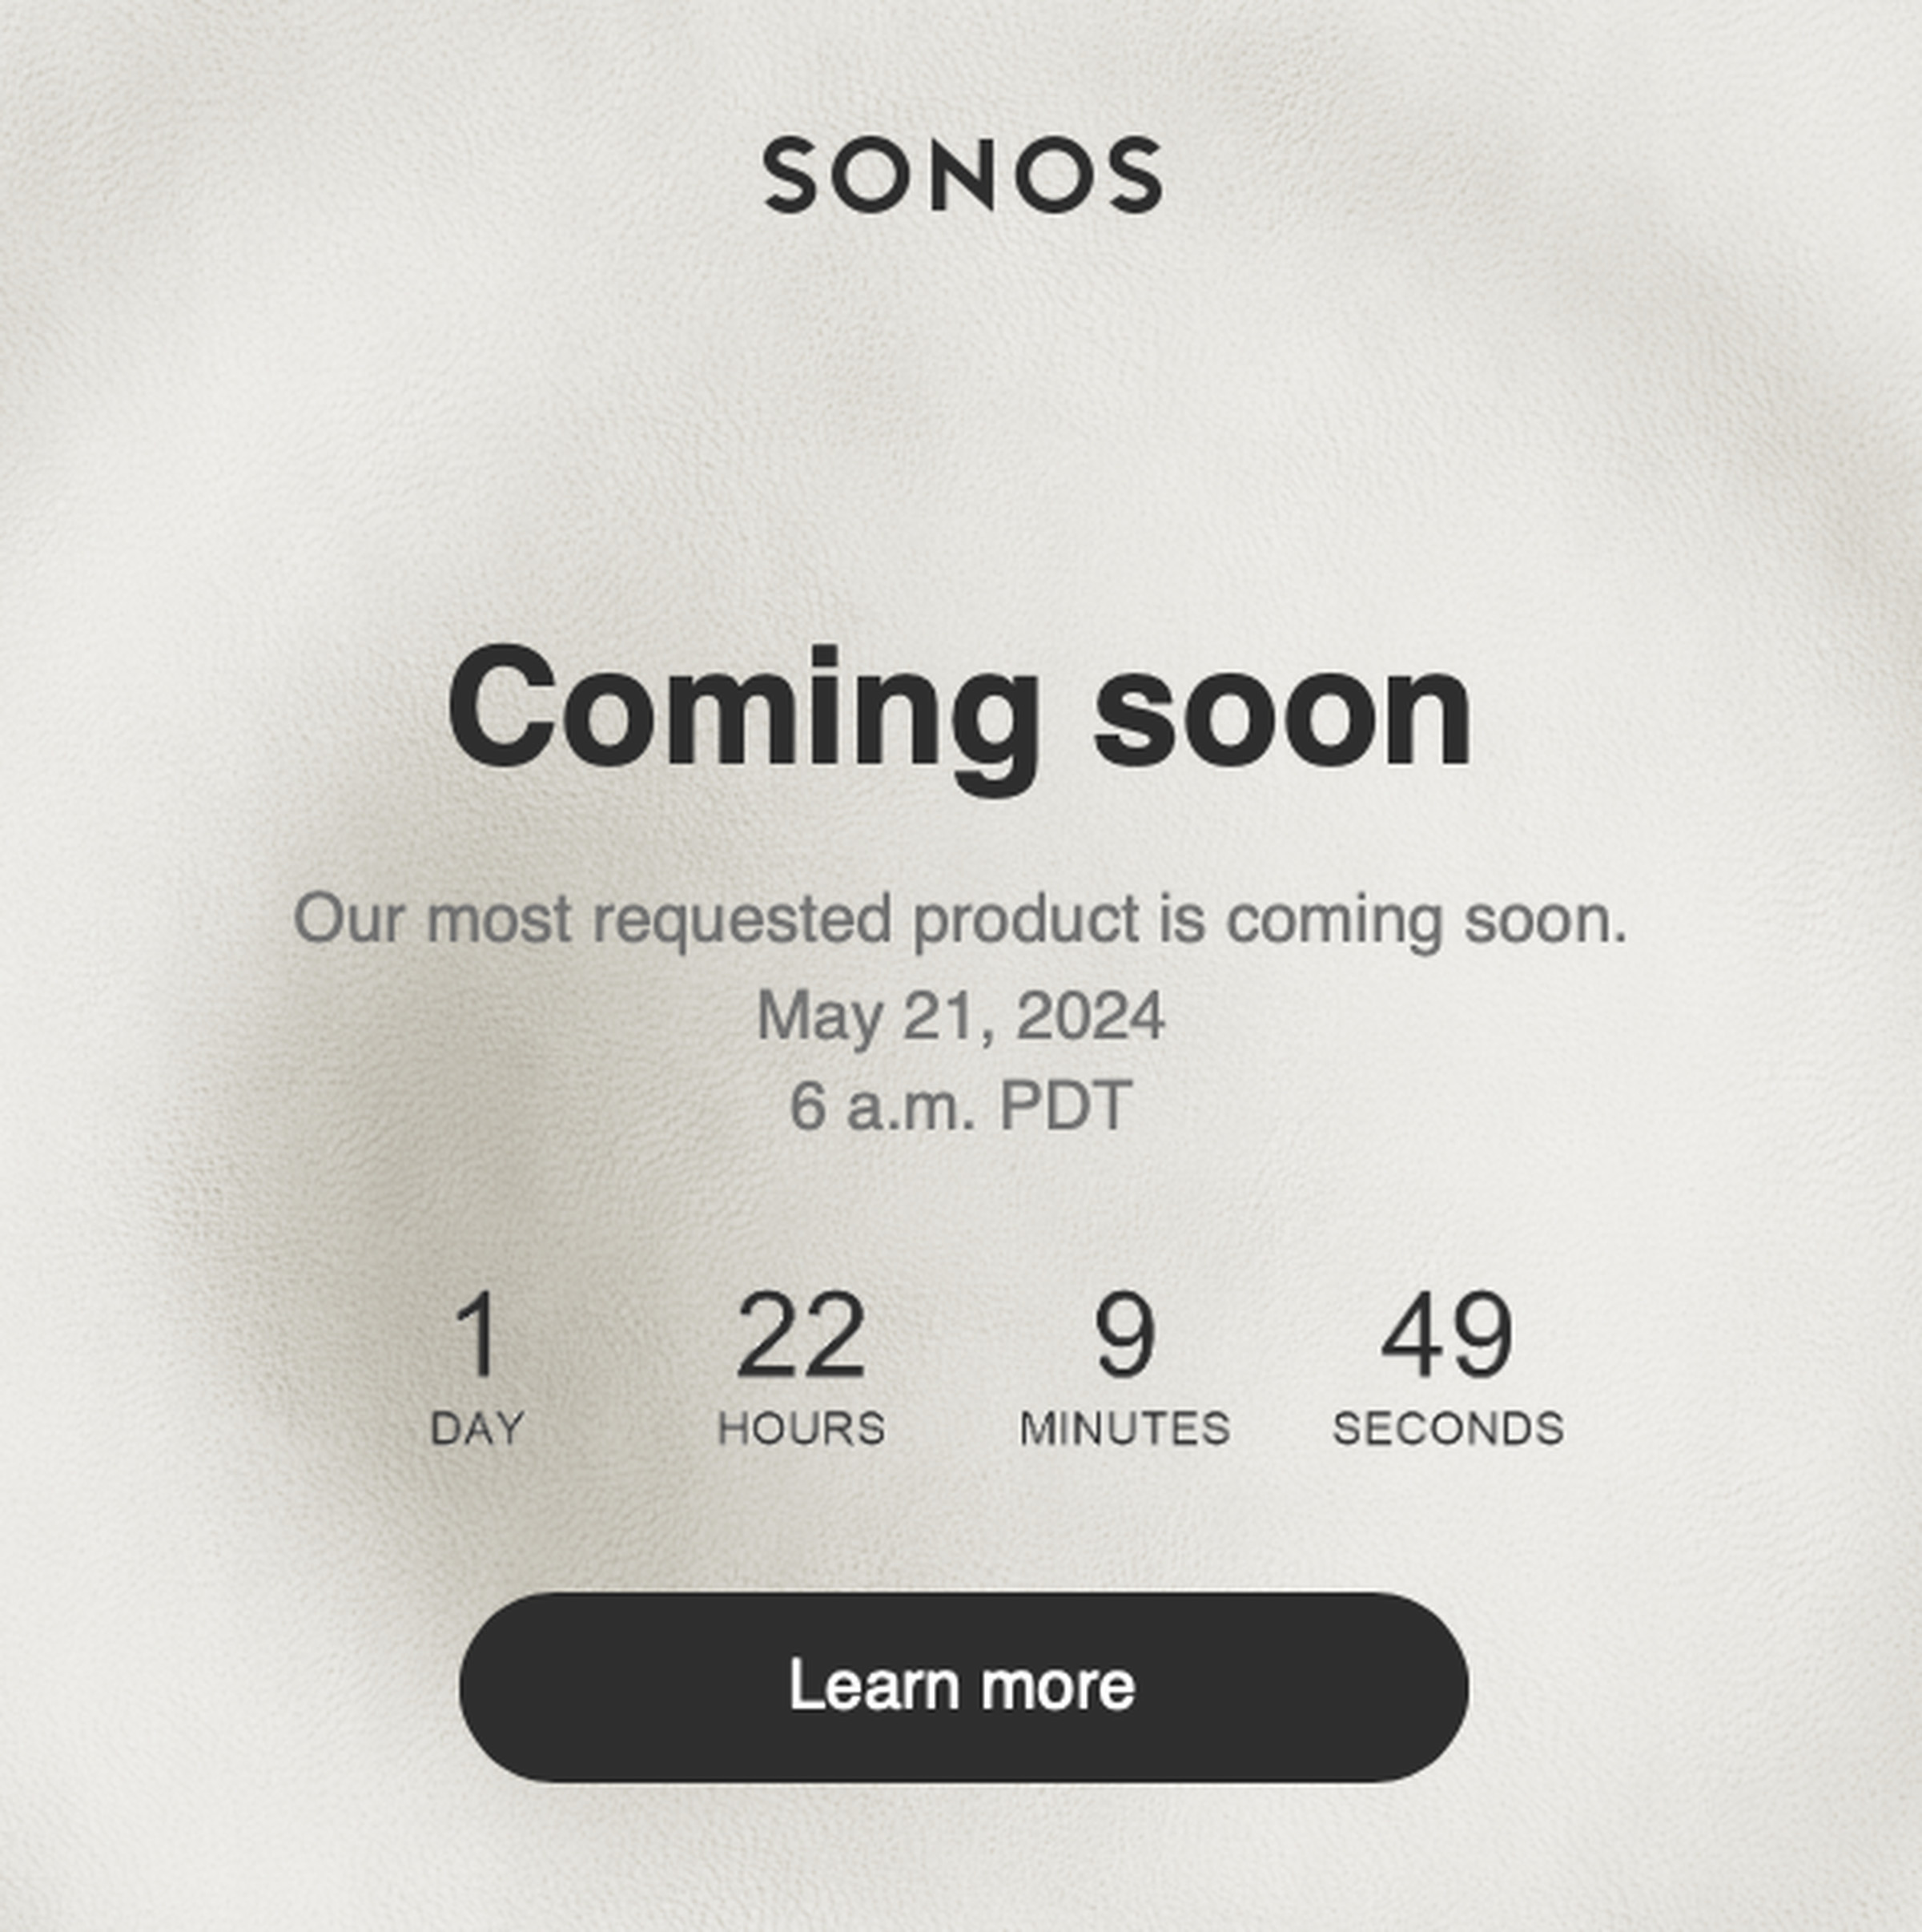 Screenshot of Sonos’ “Coming Soon” message going out on its email lists.